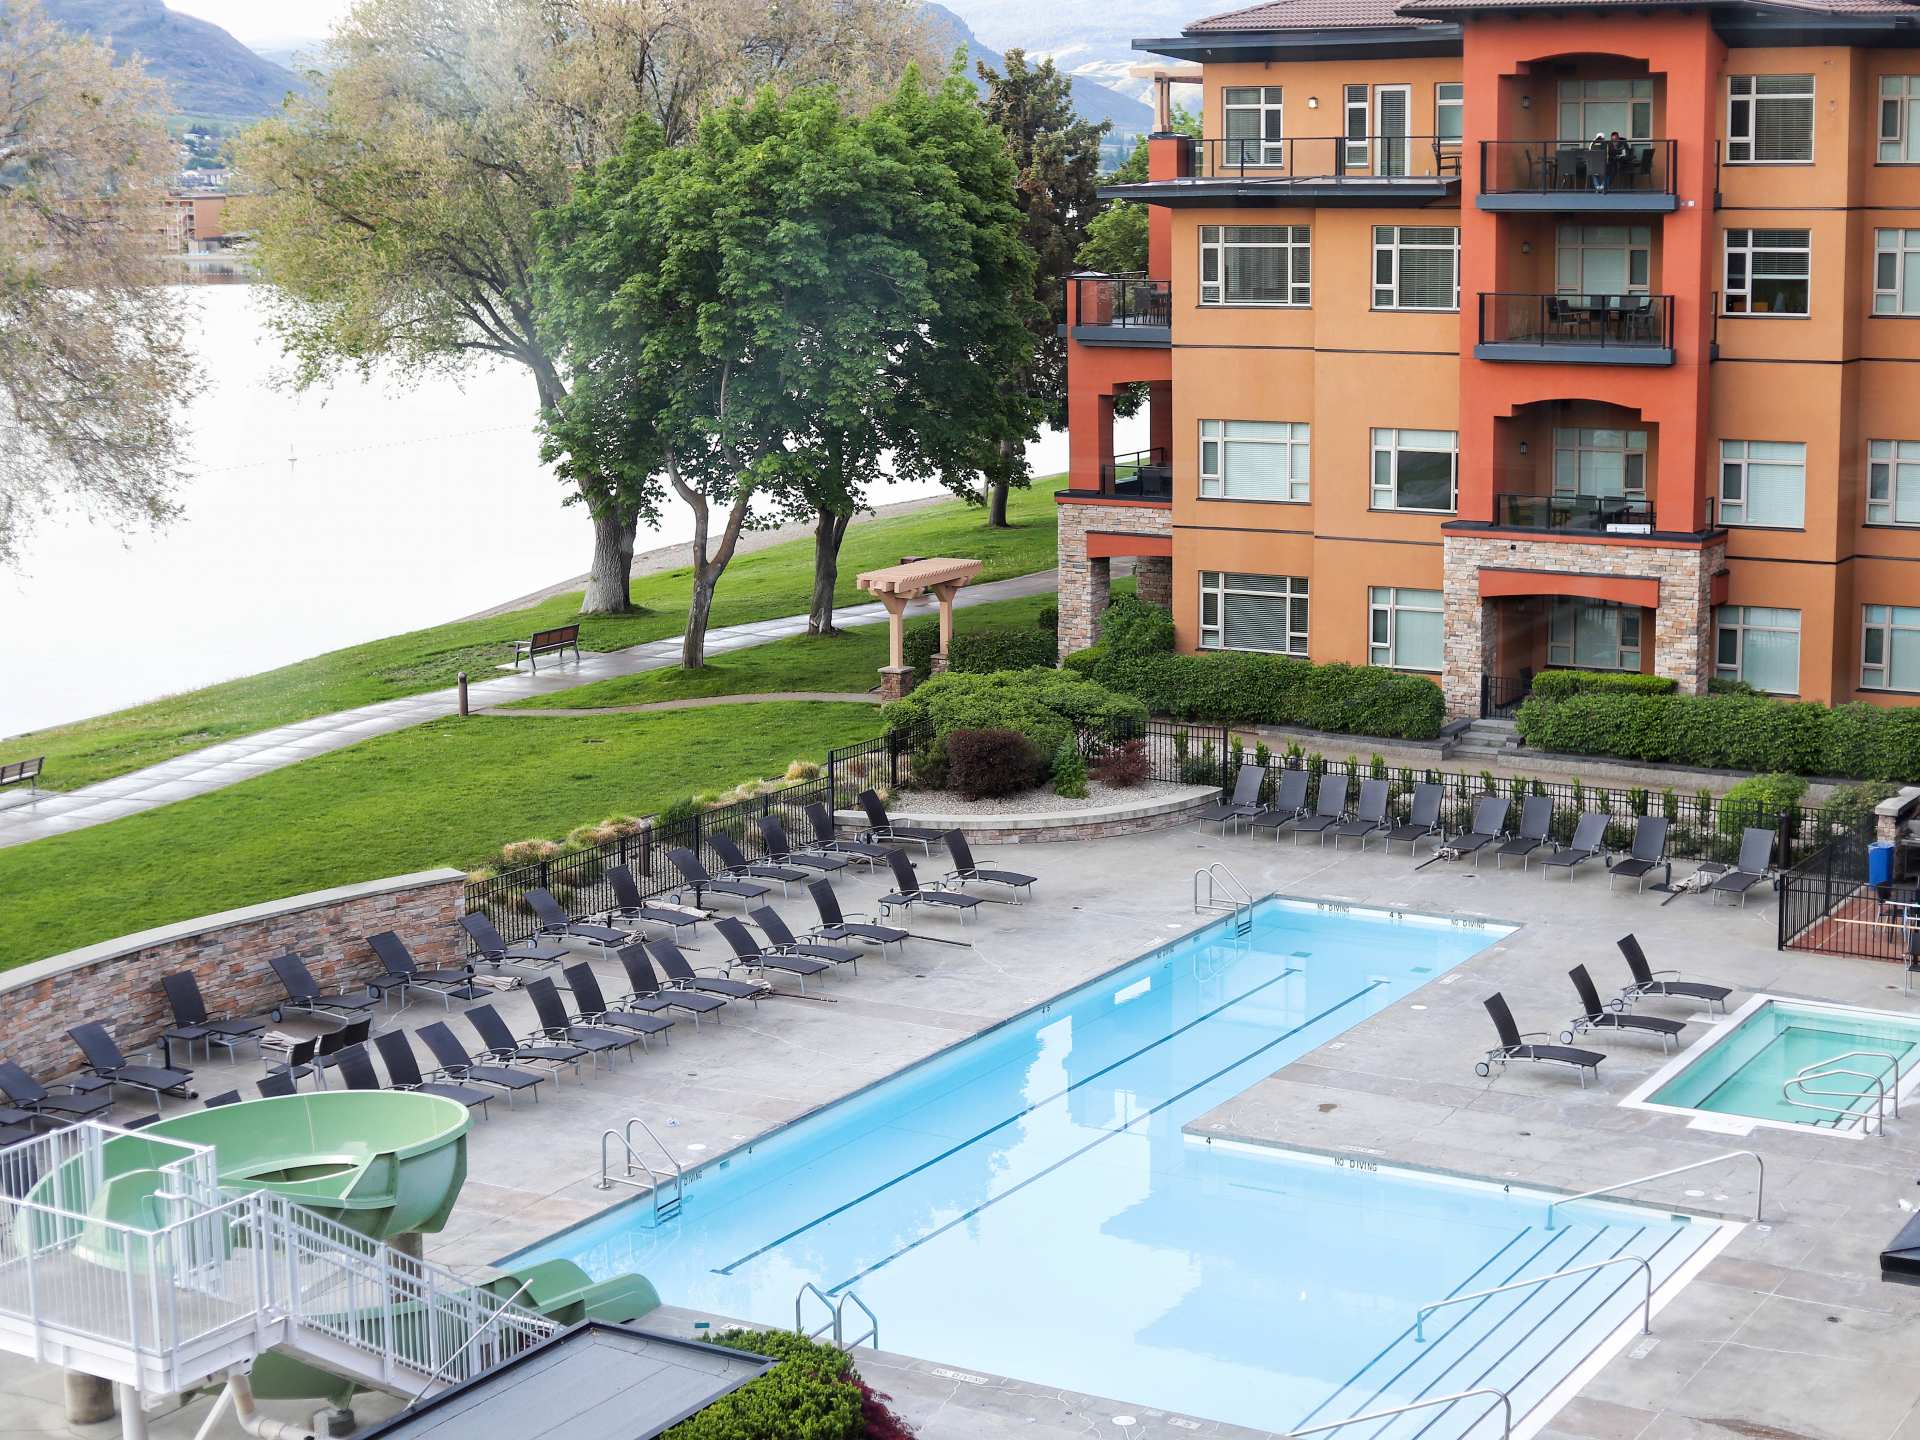 Best wineries and things to do in Osoyoos and Oliver B.C. | Pool at Watermark Beach Resort